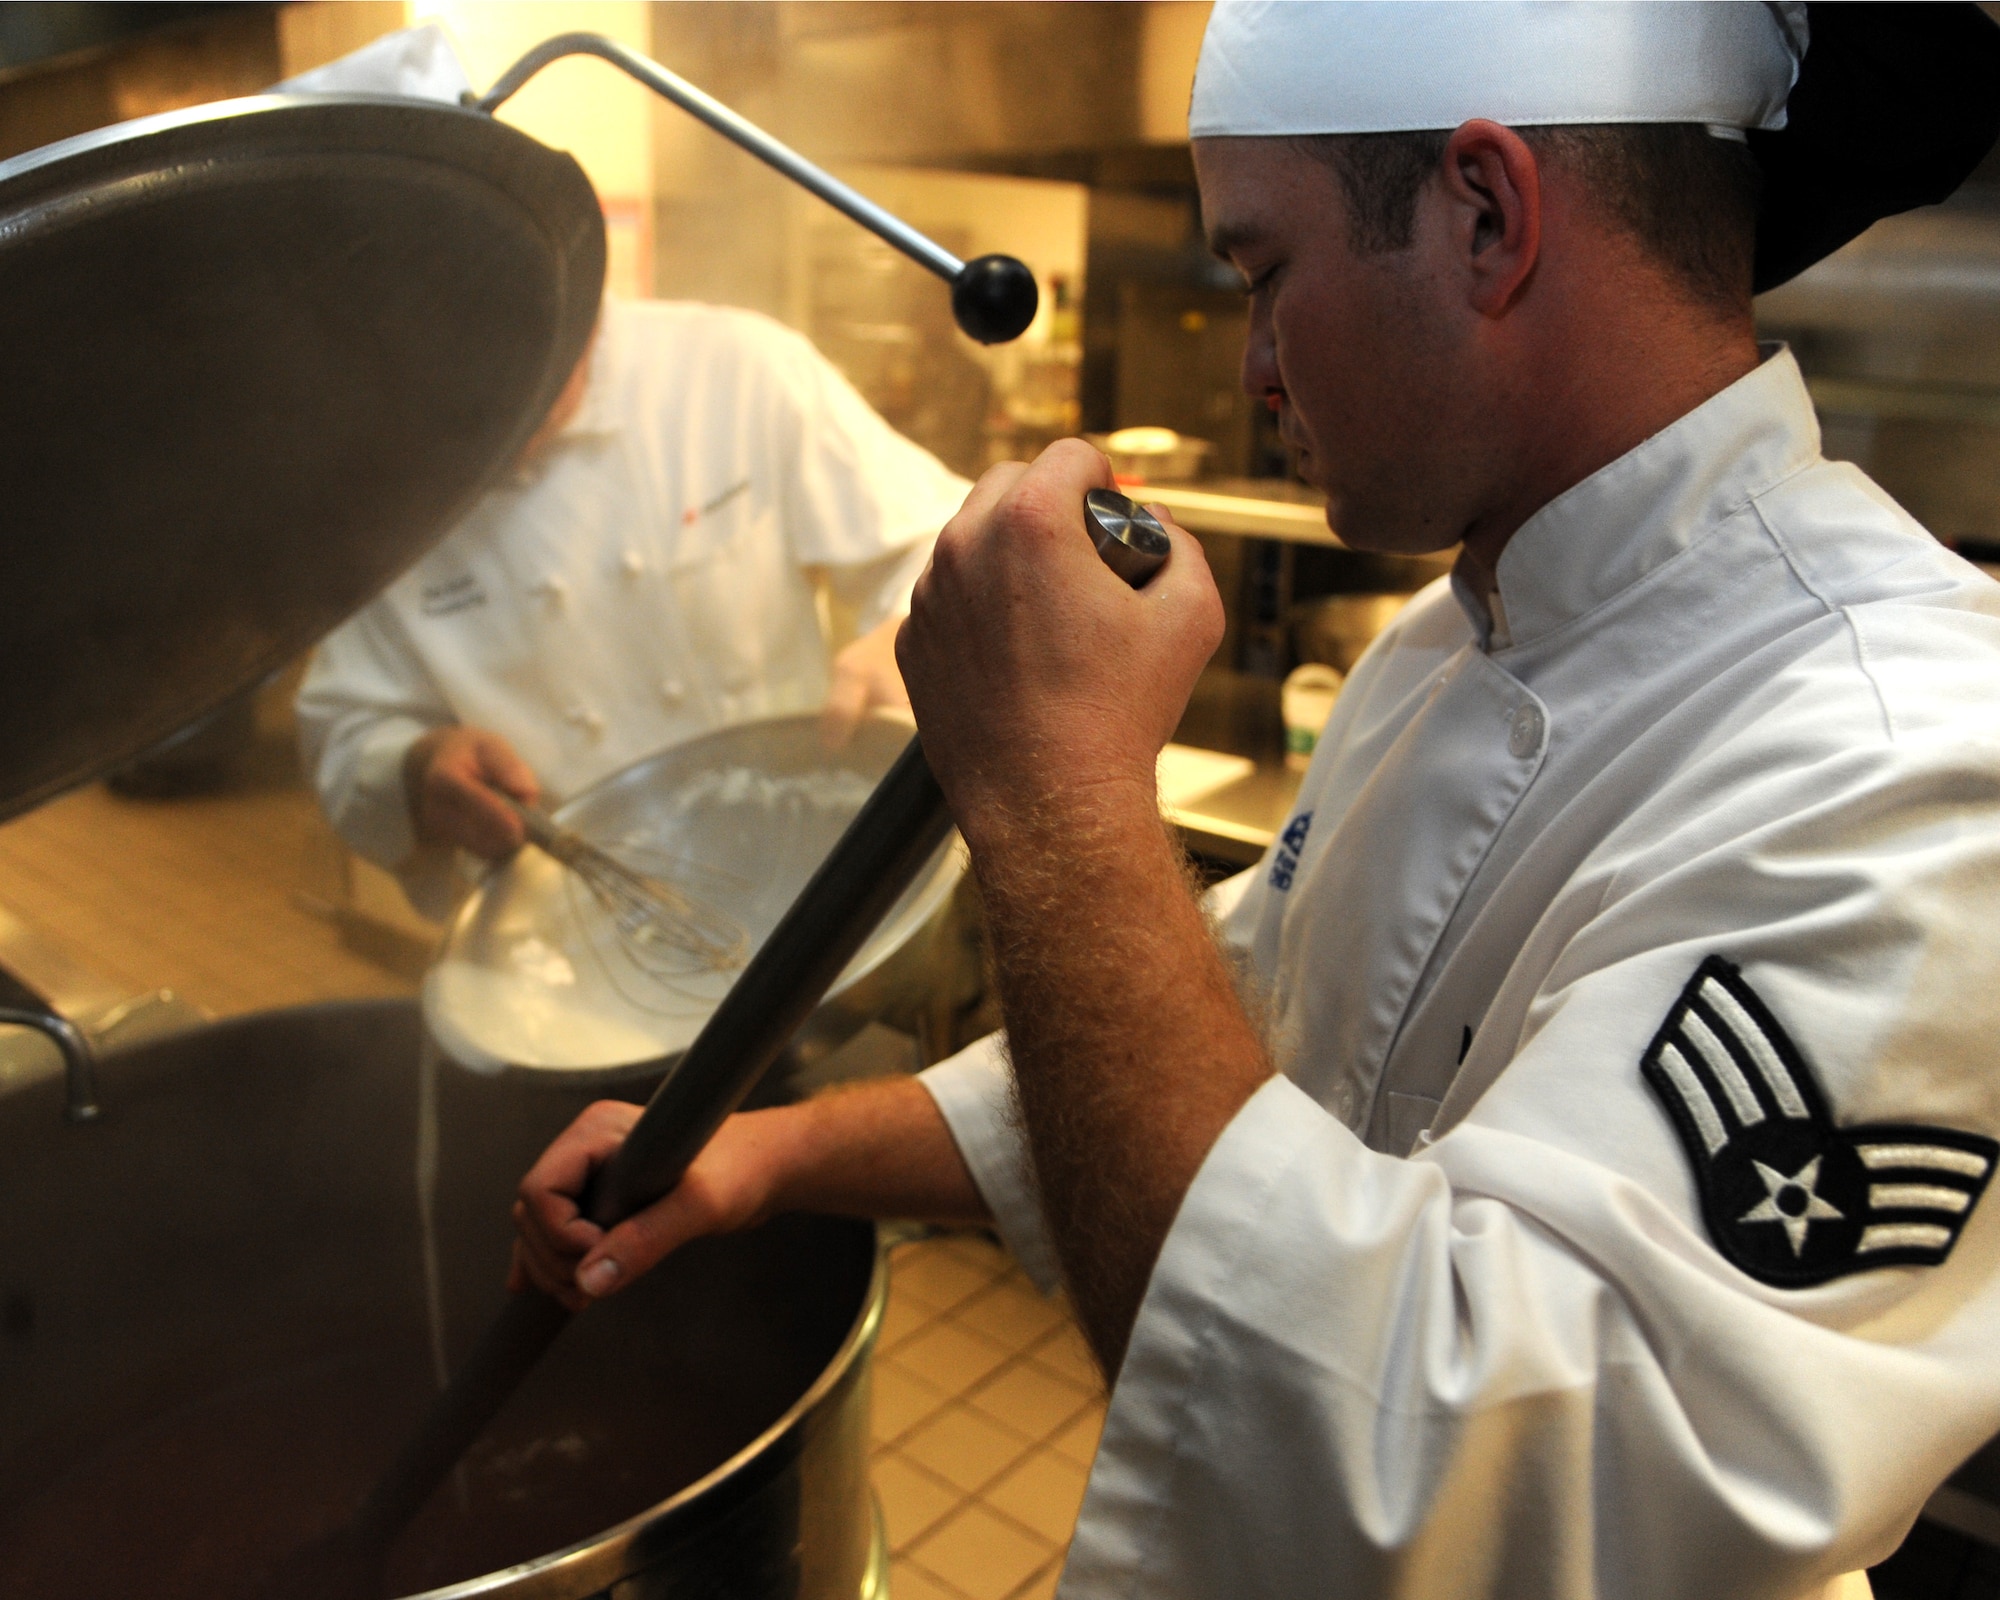 Senior Airman Brady McDede, 6th Force Support Squadron food service technician, stirs a large pot of Manhattan clam chowder, at the Citi Bank corporate building in Tampa, Fla., March 23, 2012. McDede has been training with civilian chefs to help improve the dining conditions on MacDill Air Force Base, Fla. (U.S. Air Force photo by Airman Basic David Tracy)